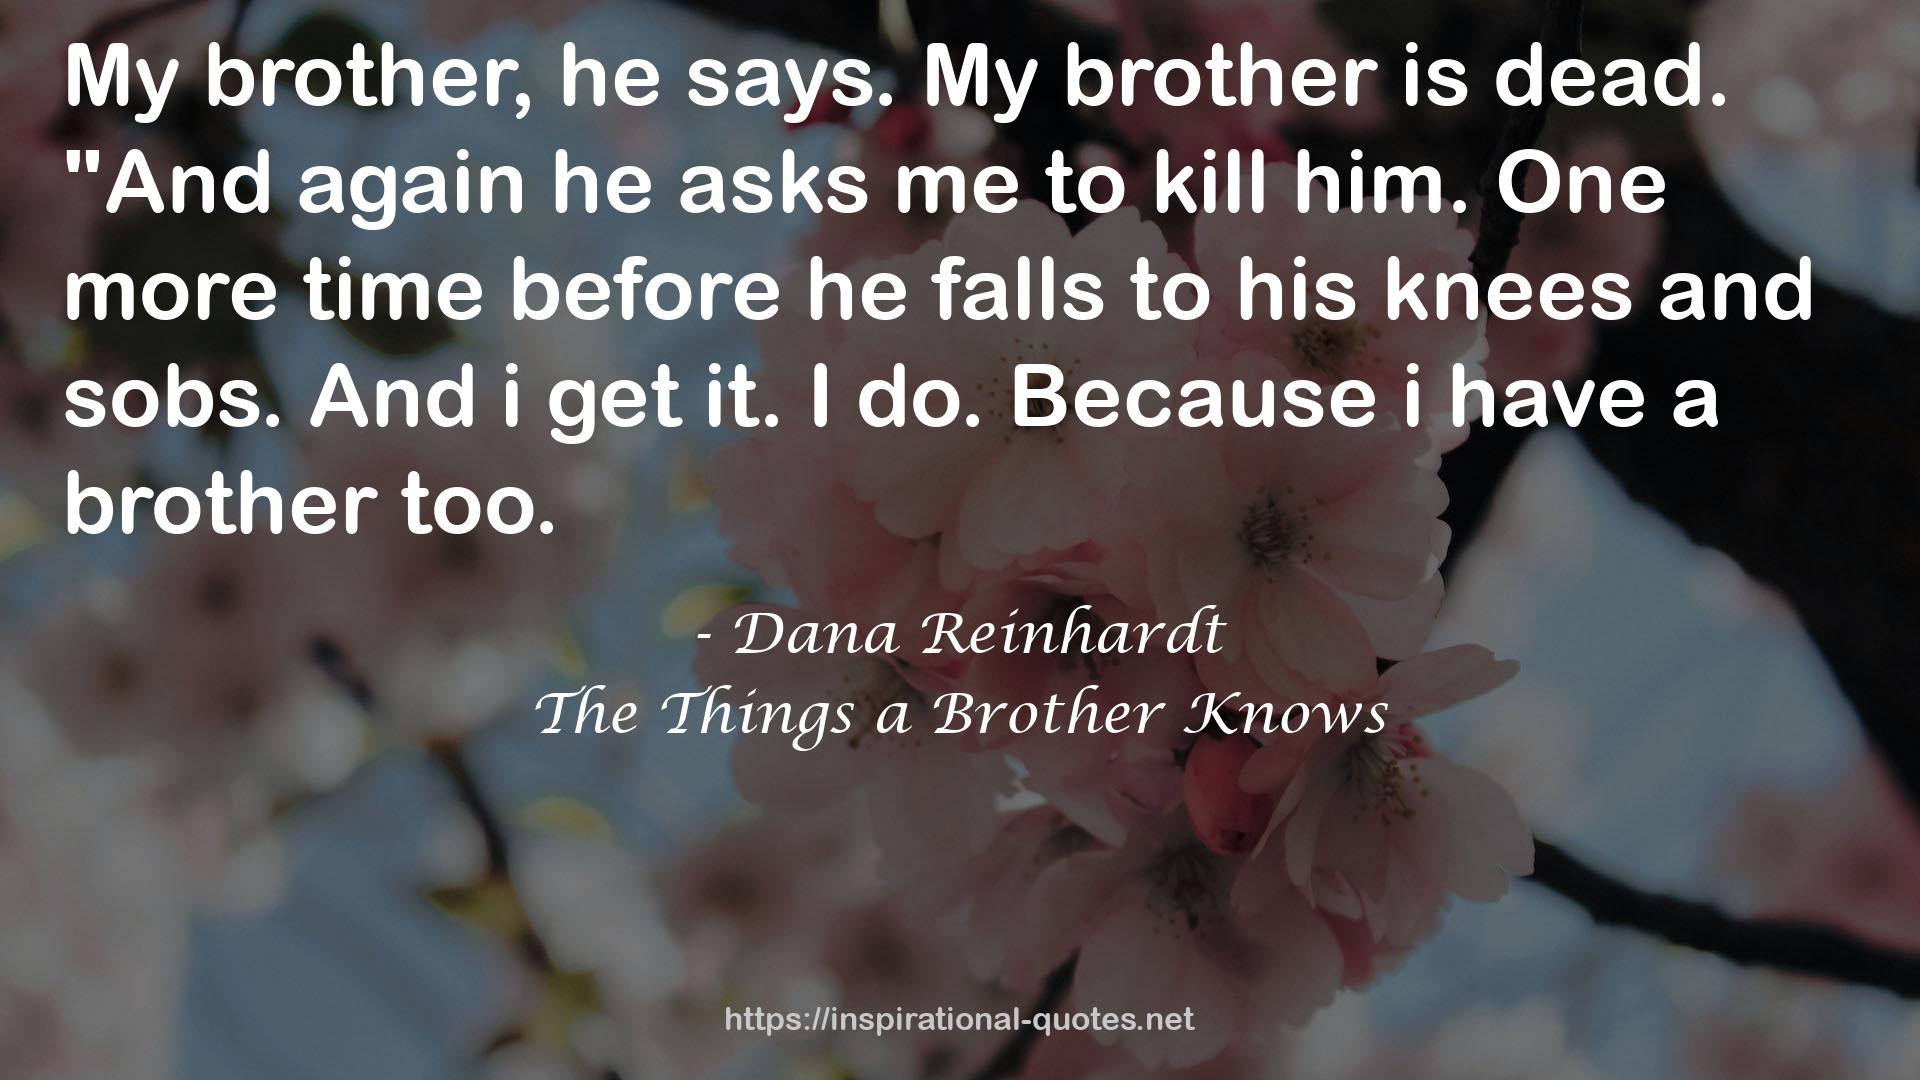 The Things a Brother Knows QUOTES